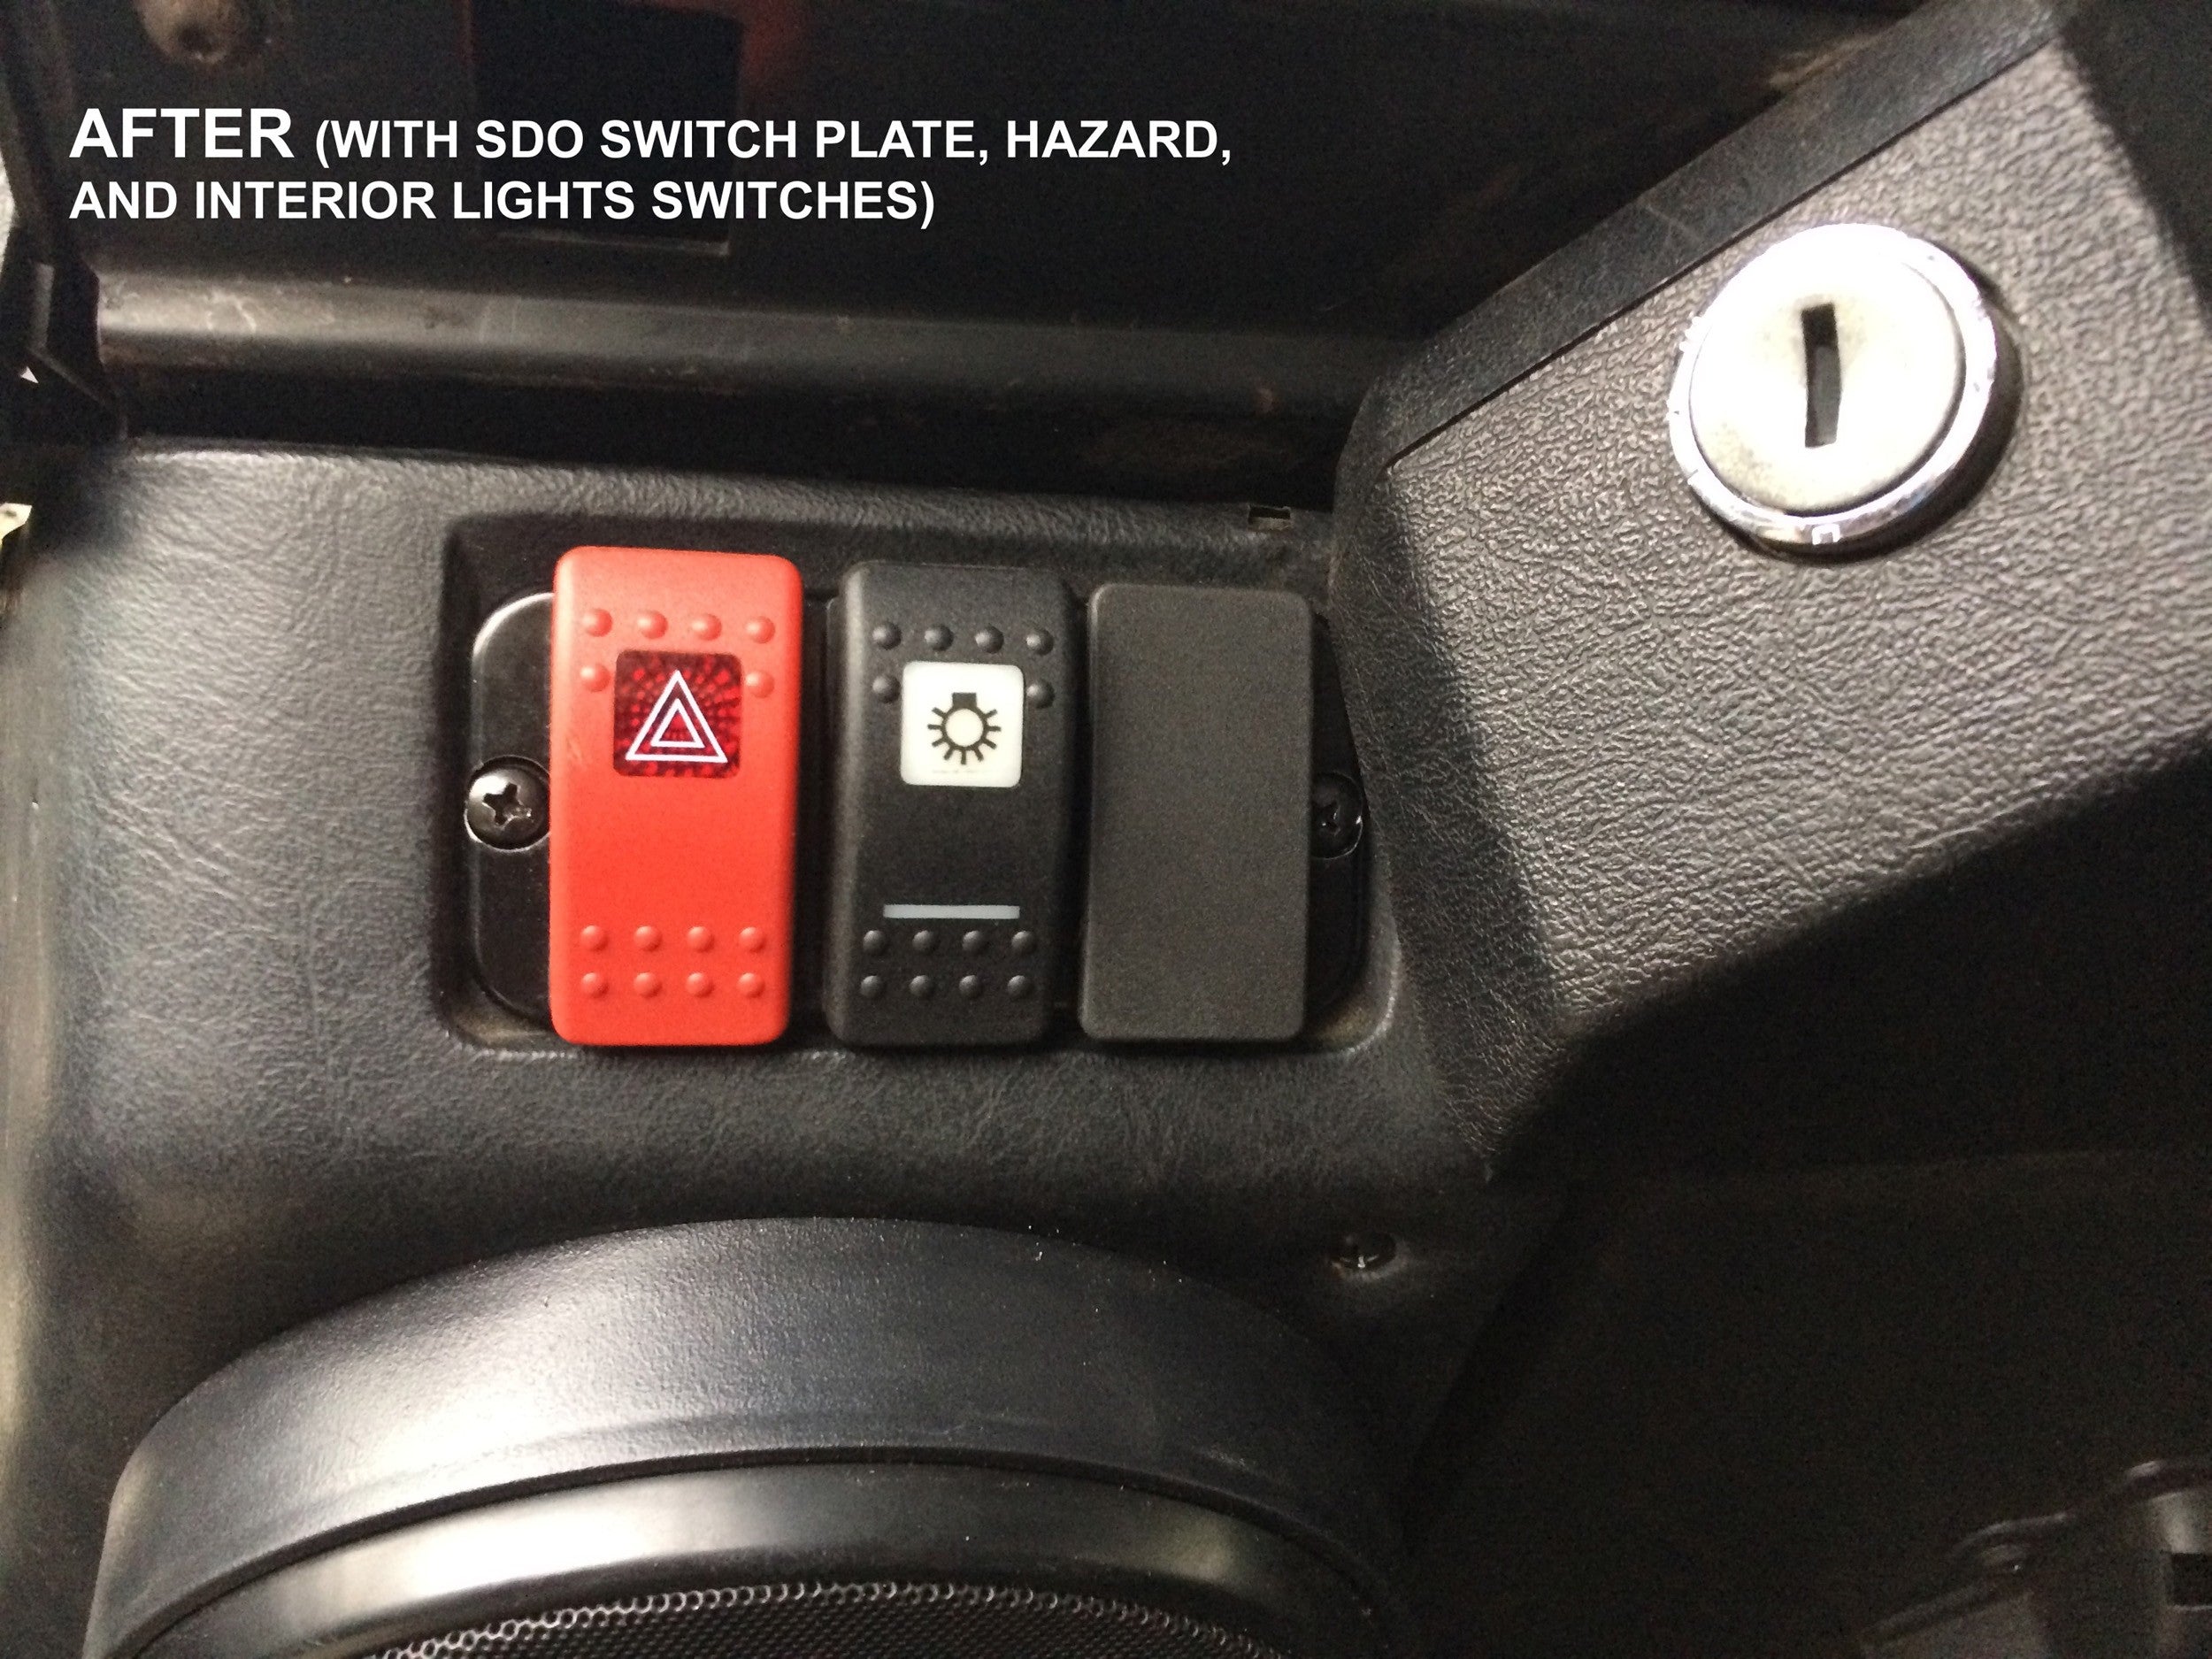 Defender Hazard Switch Wiring Harness (*includes* Carling Hazard Switch & Multiplug) - for Land Rover 90/110/130